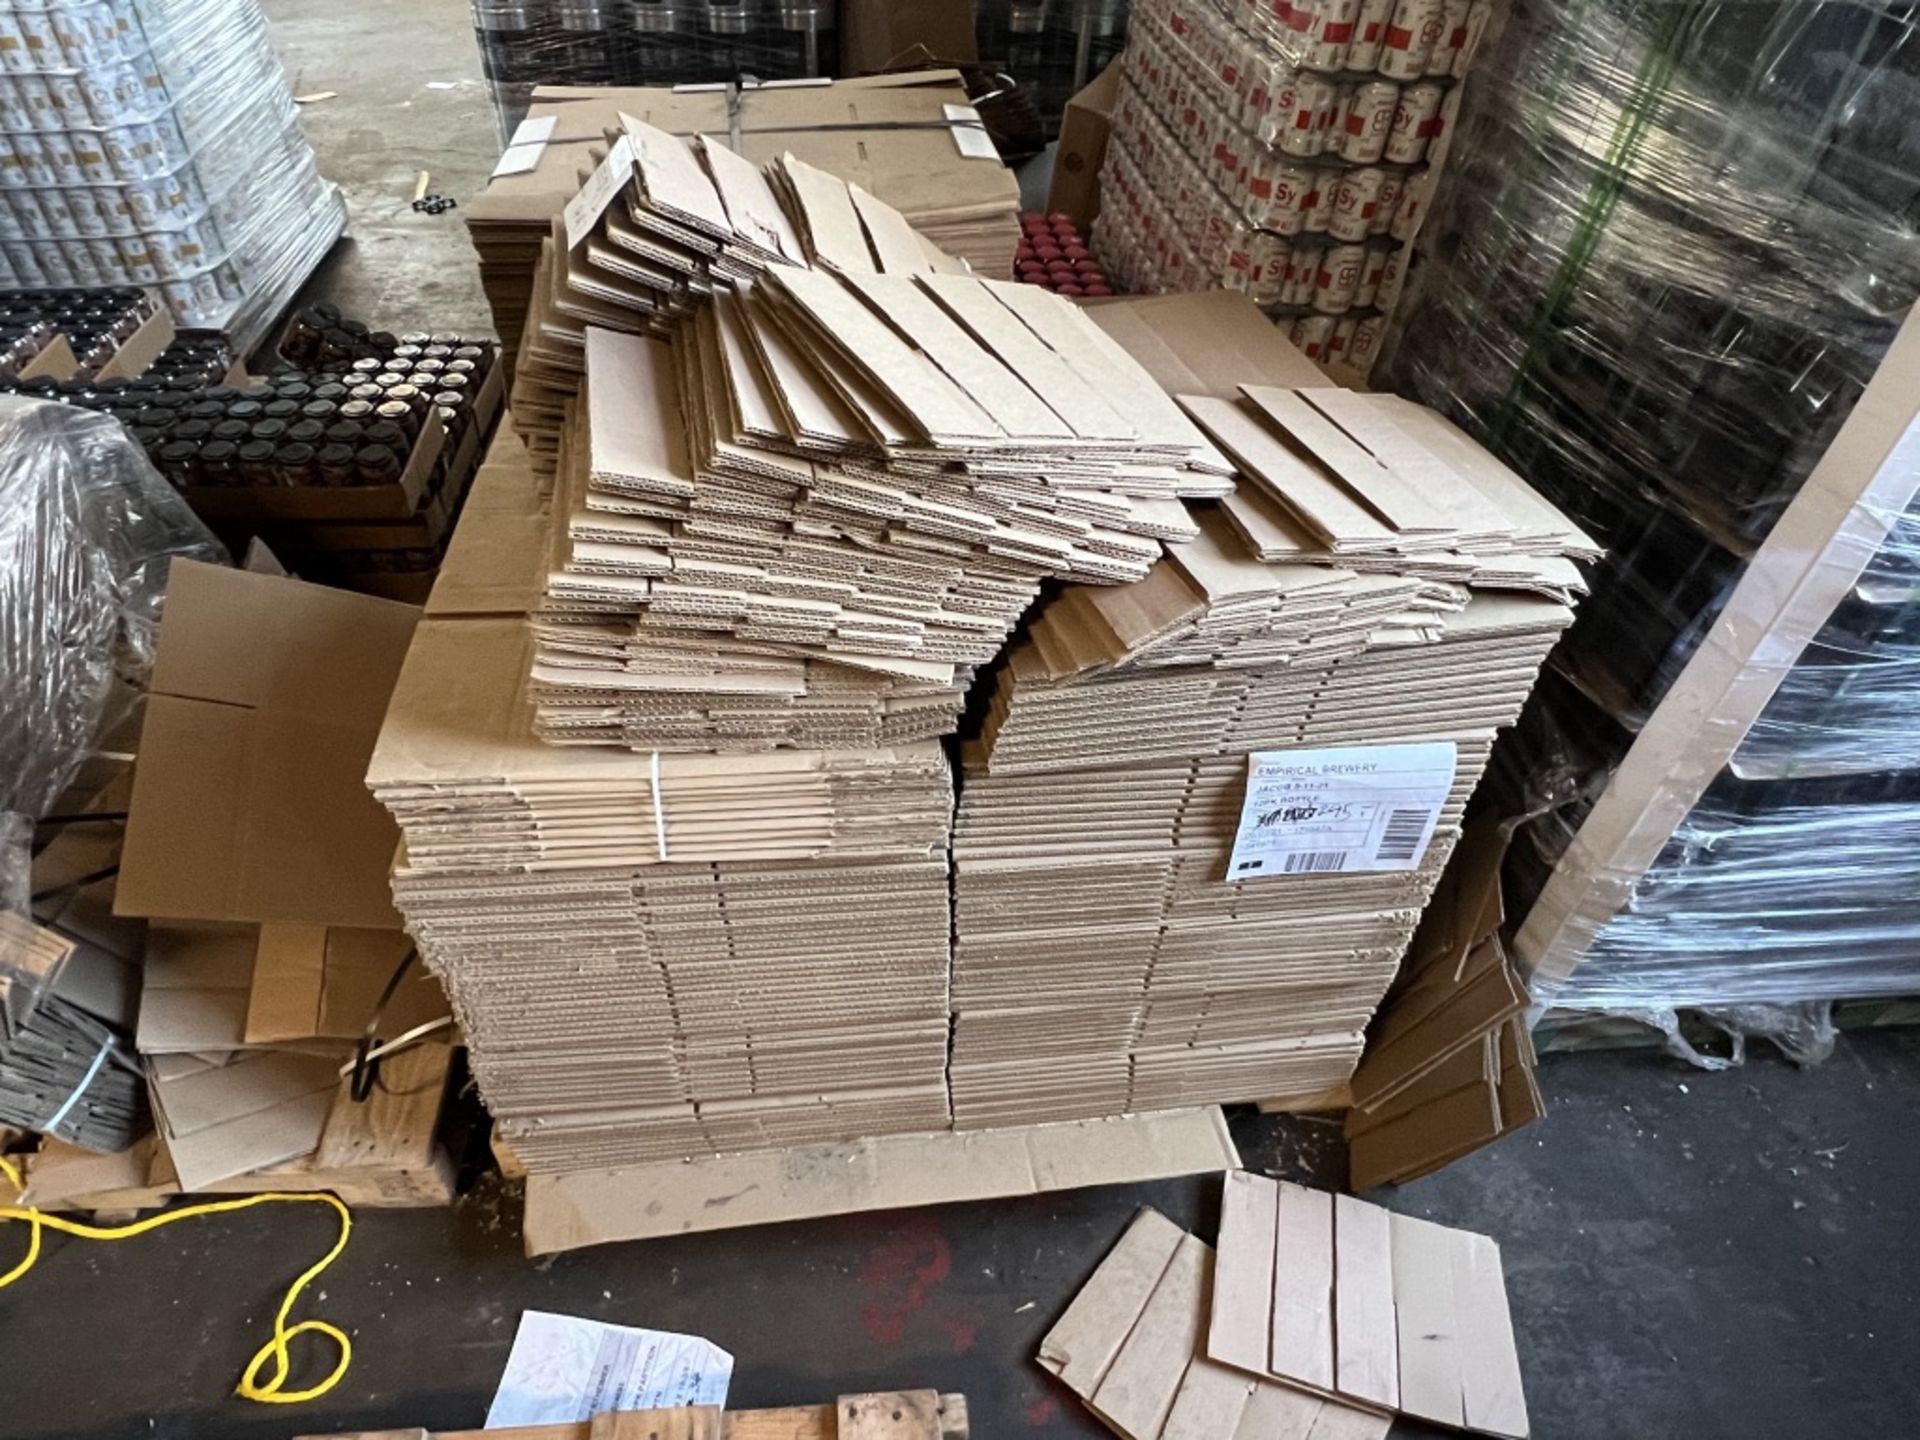 LOT OF: (3) PARTIAL PALLETS OF CARDBOARD BOXES AND CARDBOARD INSERTS - Image 9 of 17